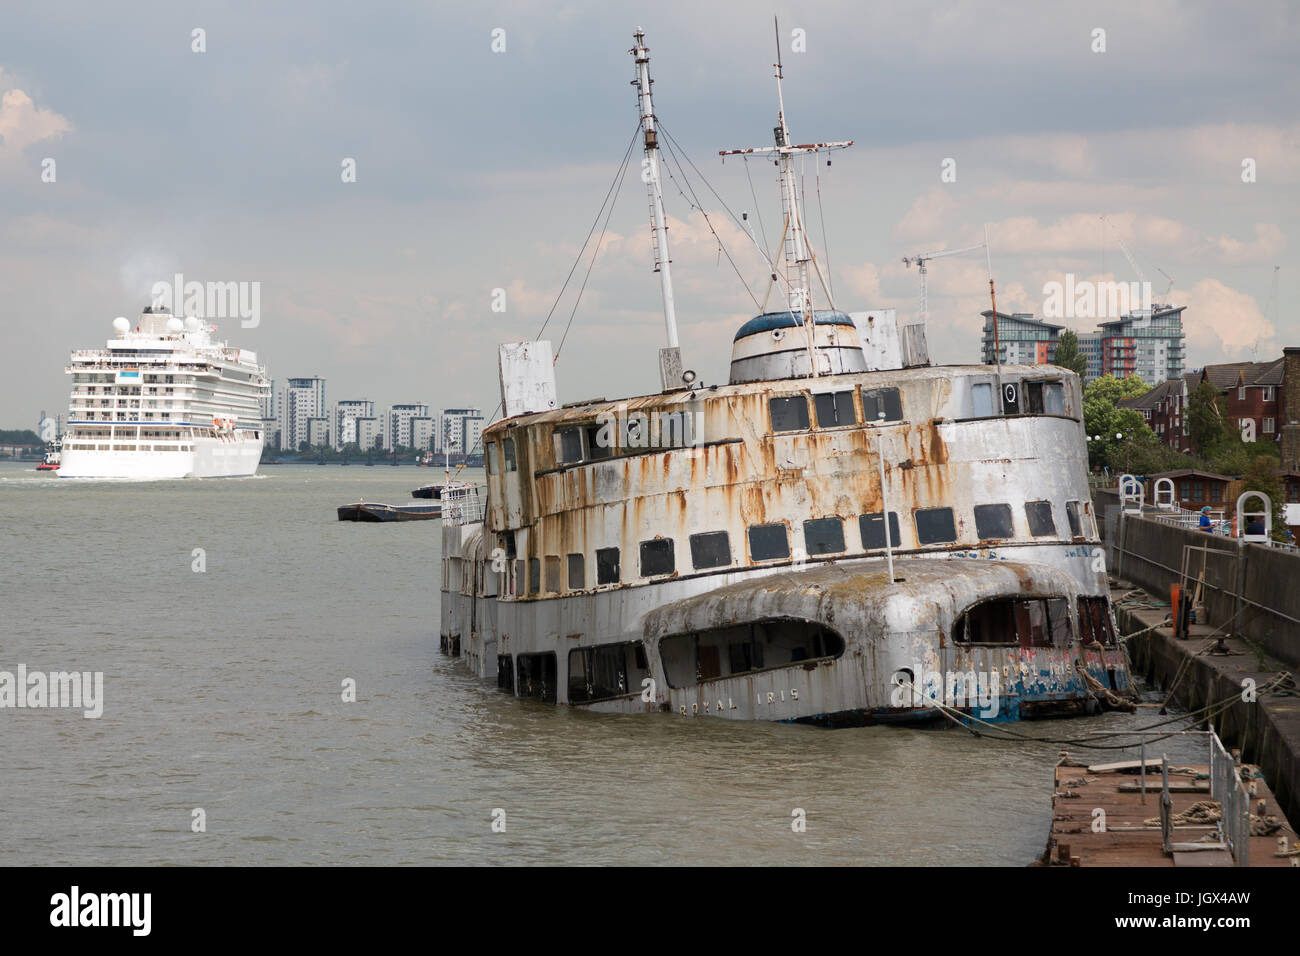 Woolwich, London, United Kingdom. 10th July, 2017. Former Mersey ferry MV Royal Iris pictured listing and in a state of disrepair on the River Thames at Woolwich on 10th July. The vessel was a venue for music acts including the Beatles in the 1960s and has been the subject of campaigns of return her to Liverpool. Rob Powell/Alamy Live News Stock Photo